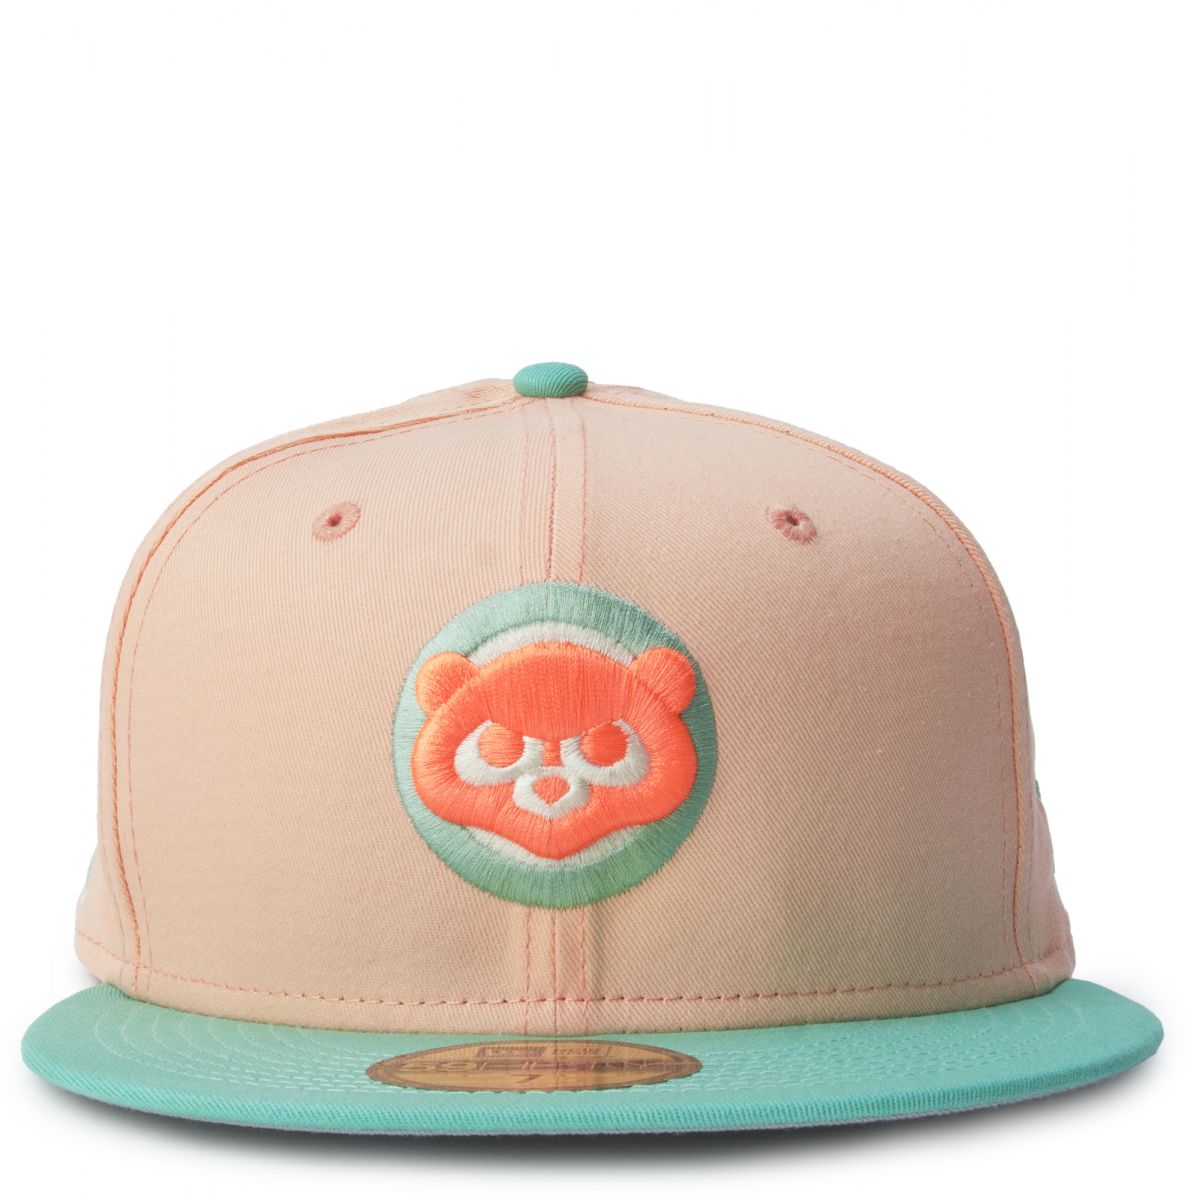 Anyone know what this hat is called? : r/neweracaps